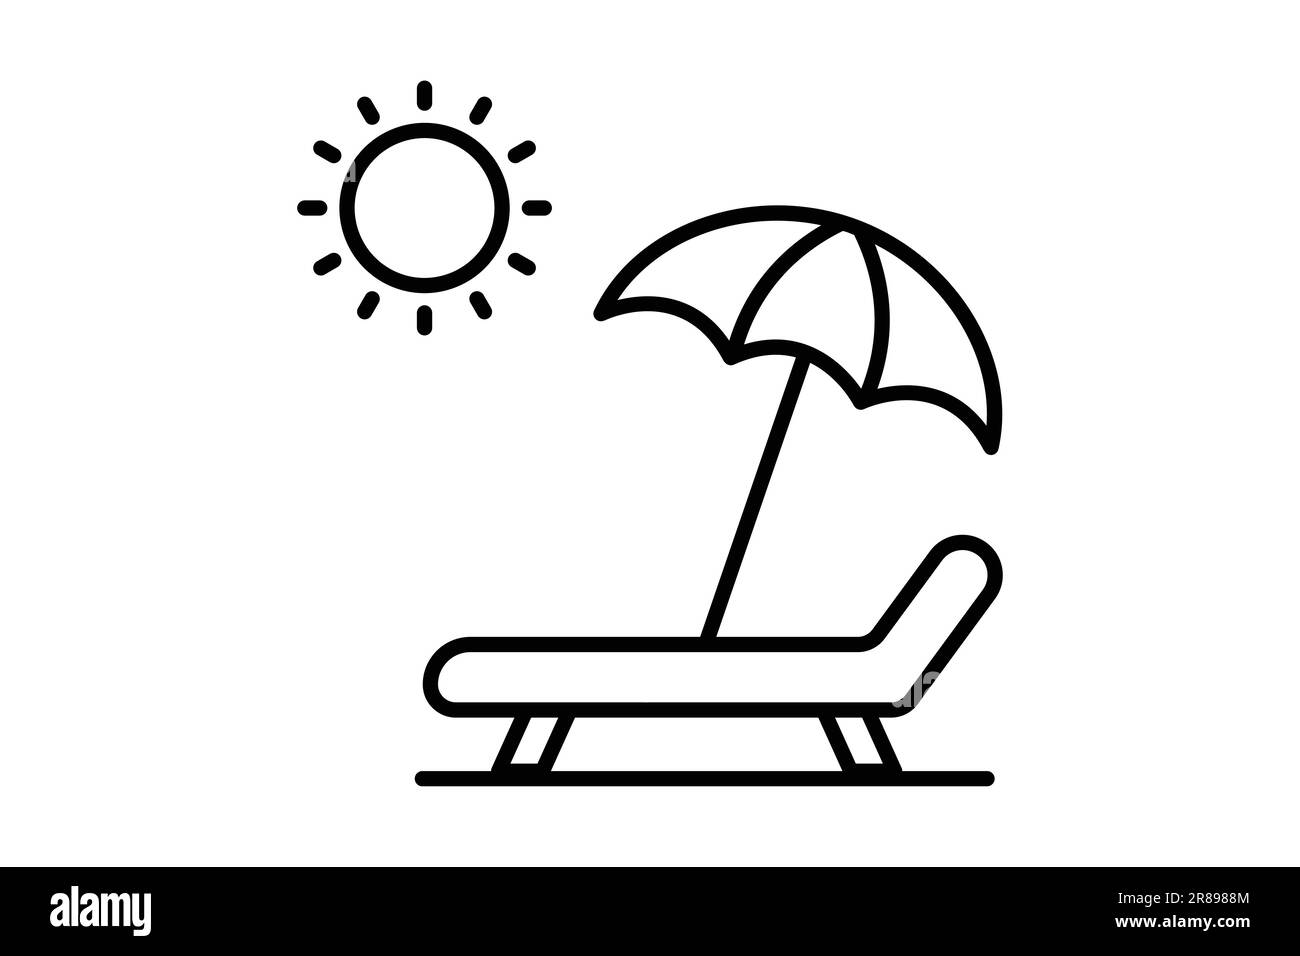 Sunbed icon. icon related to sea, summer. Contains icons beach, sun, chair, relaxation. Line icon style design. Simple vector design editable Stock Vector